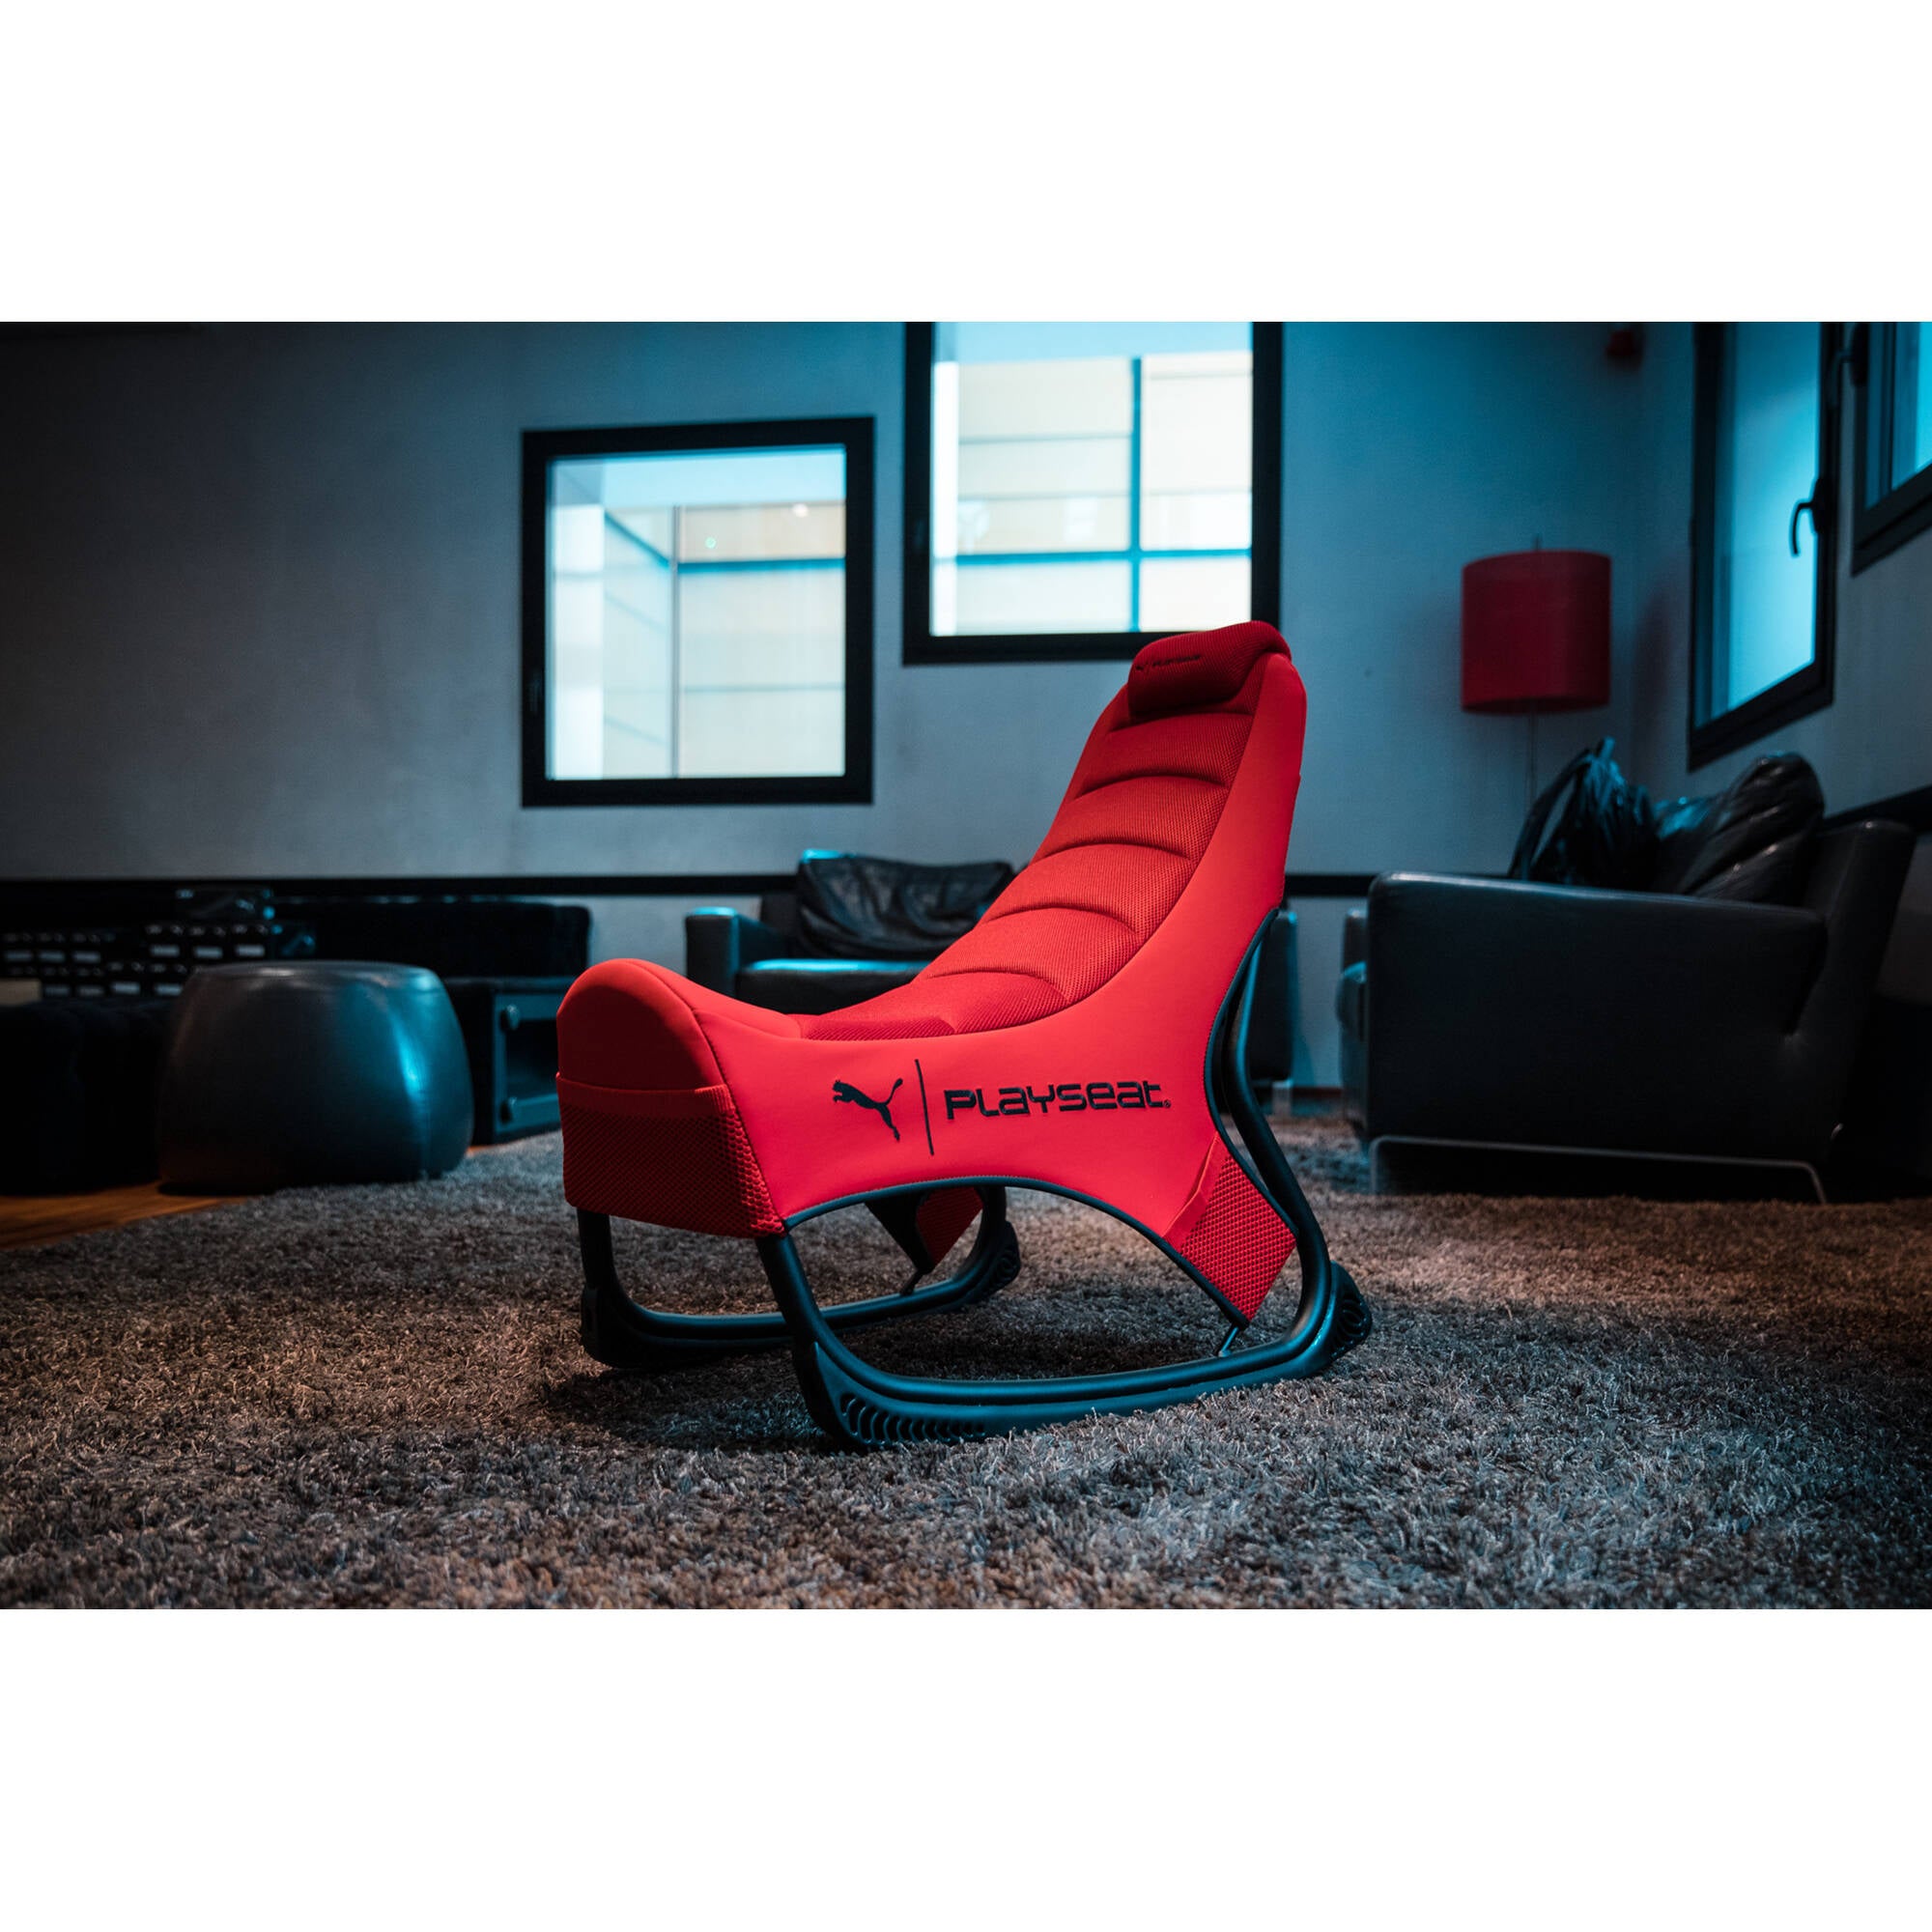 Playseat PPG.00230 Puma Active Gaming Seat Red